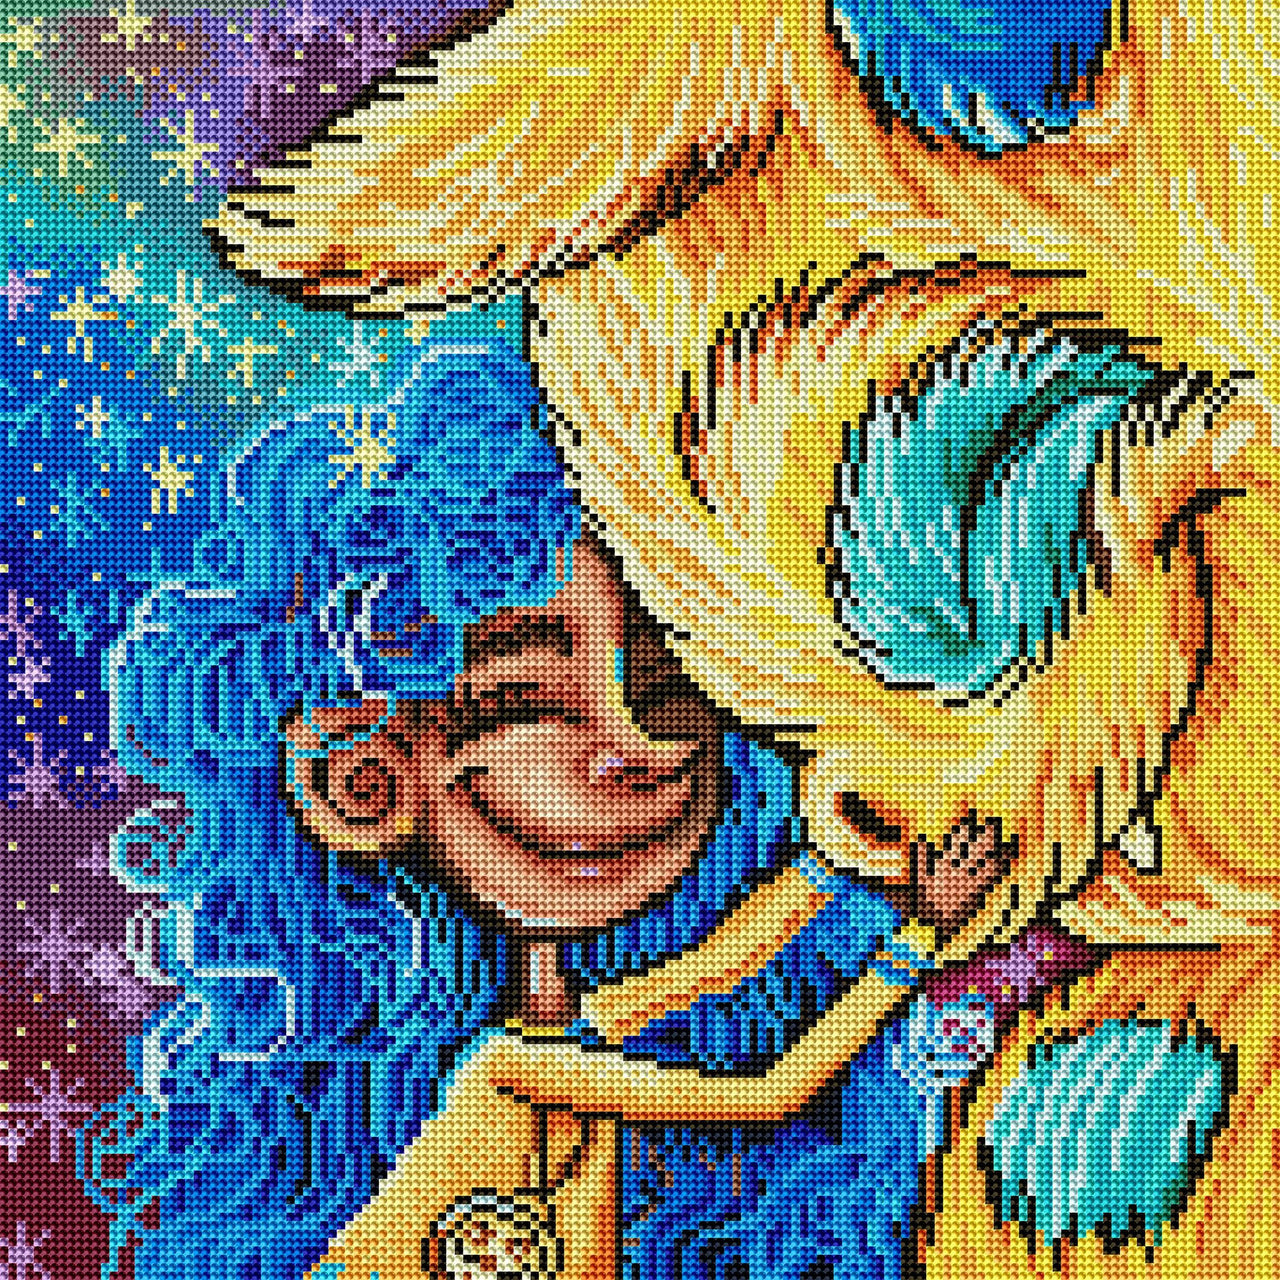 Diamond Painting Hugs for Hiccup 17" x 17" (42.6cm x 42.6cm) / Round With 34 Colors Including 3 ABs / 23,104